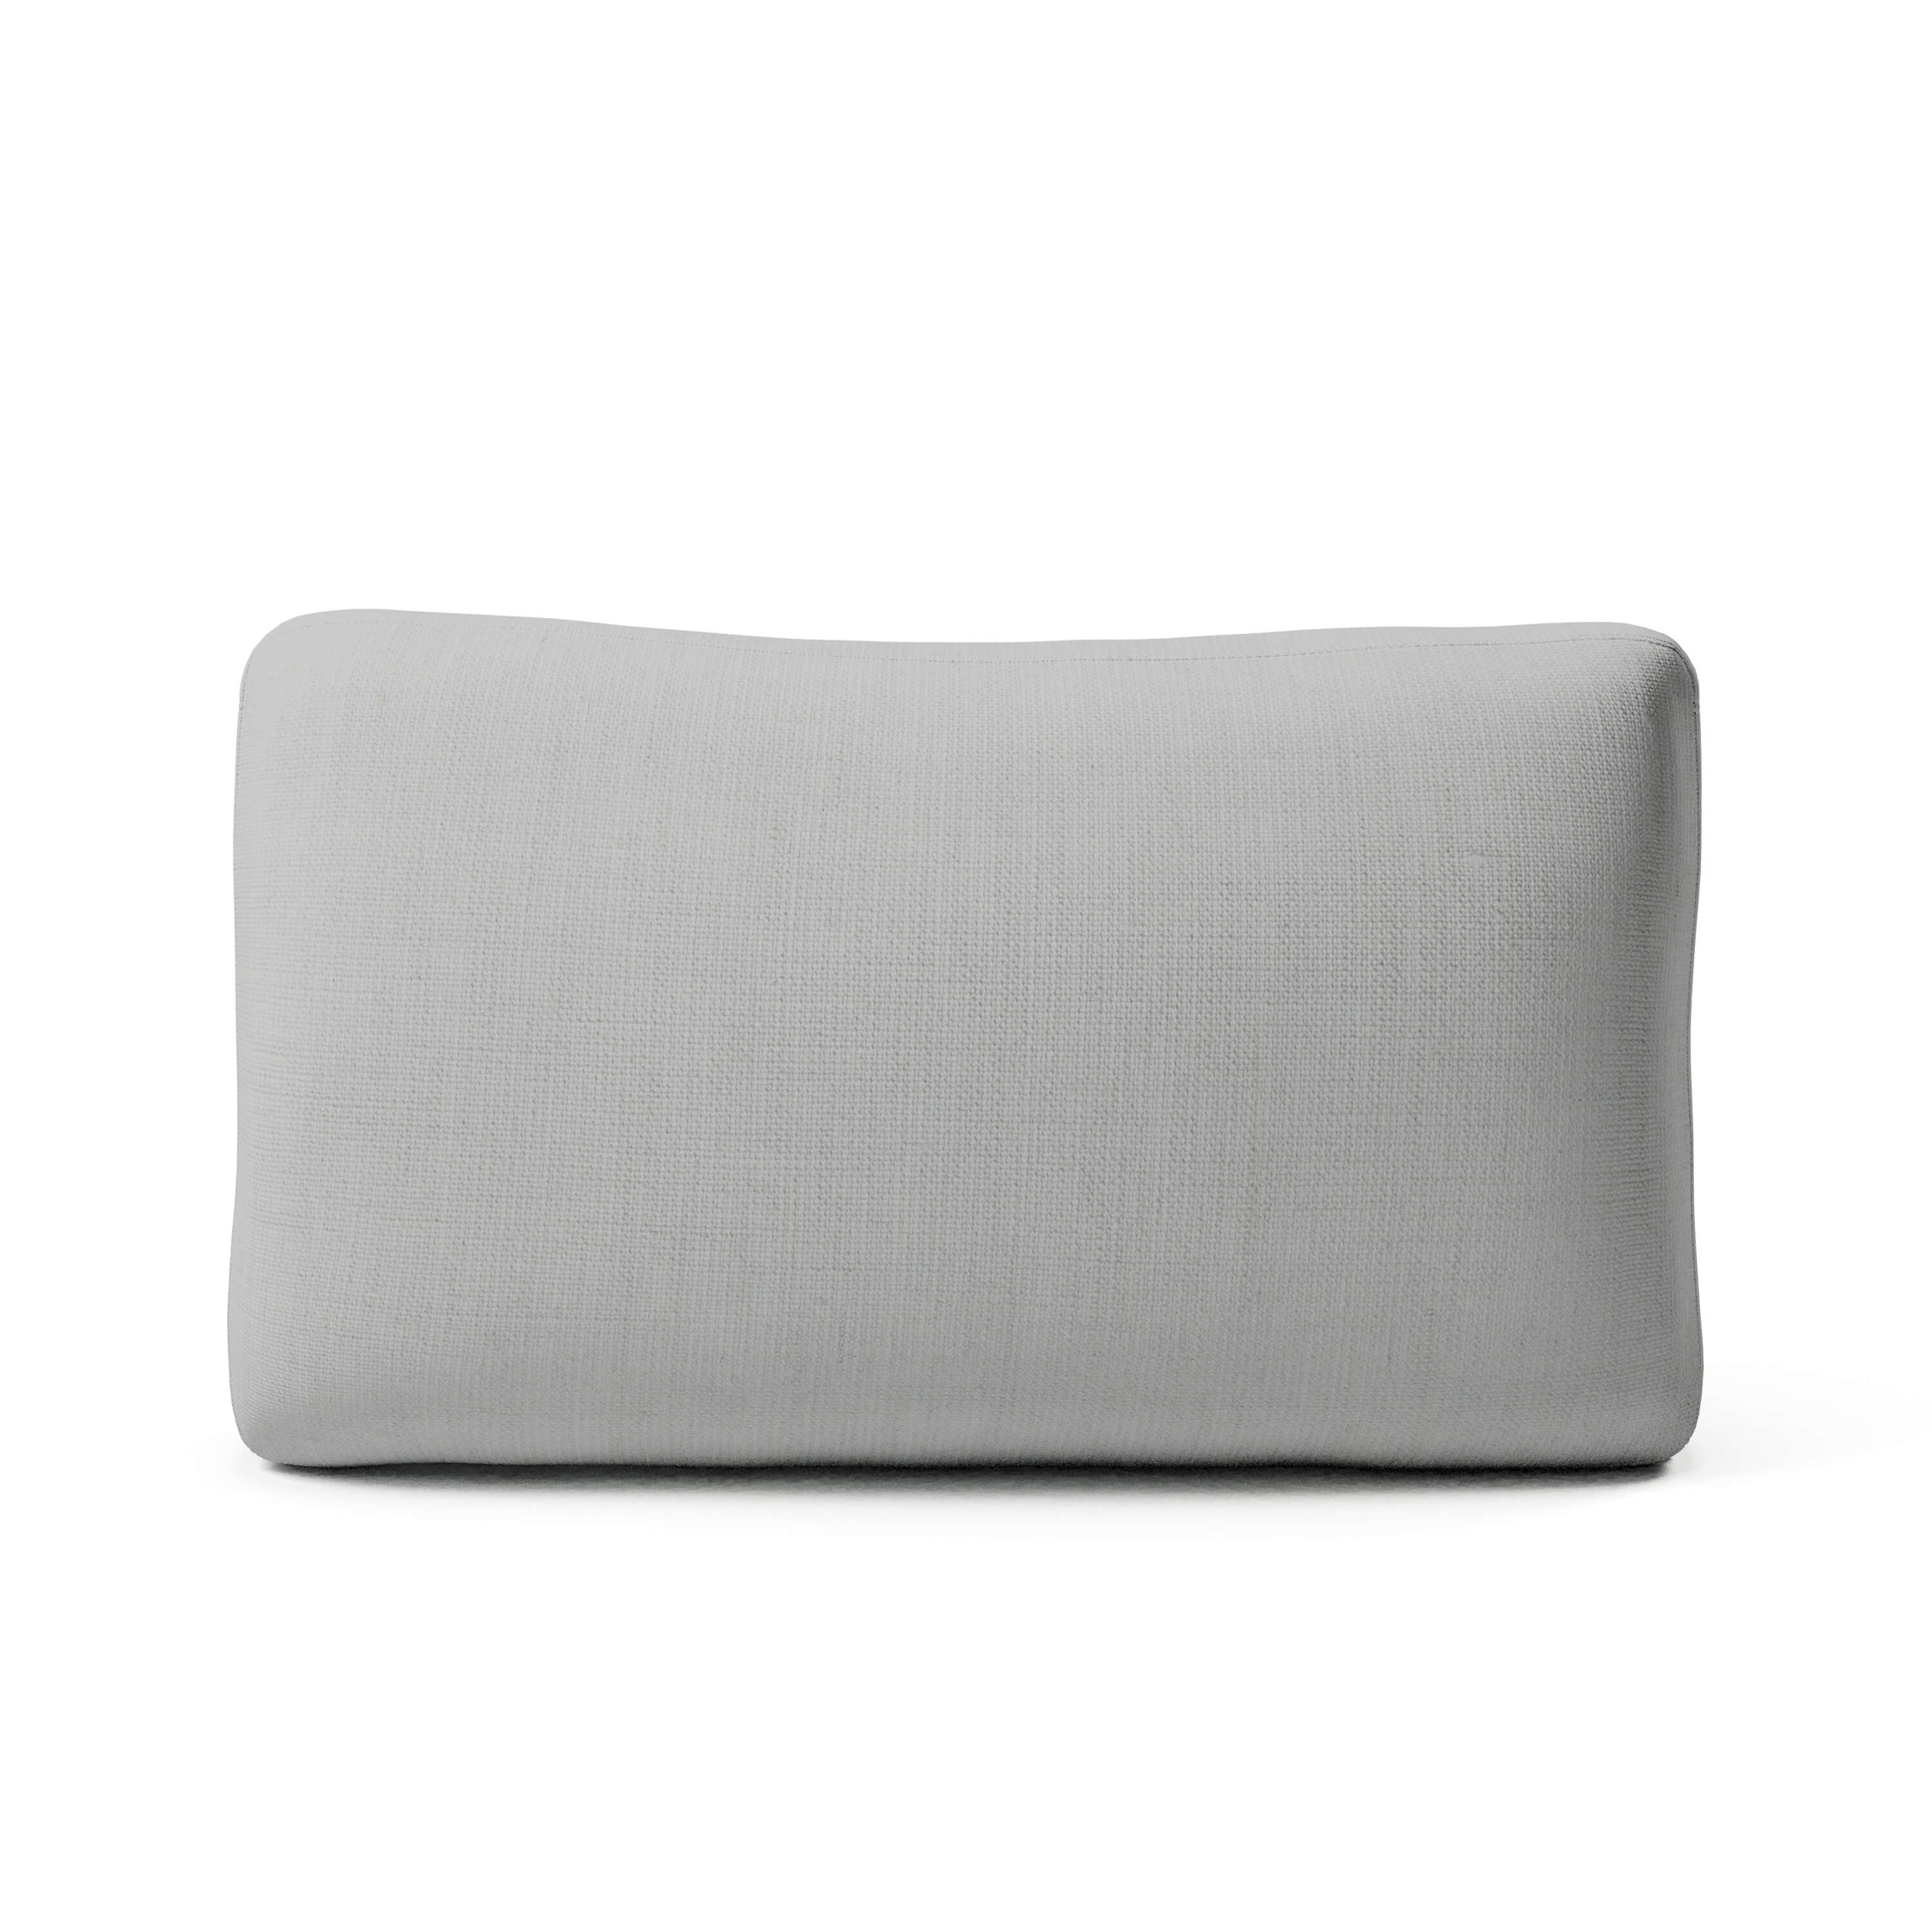 Comfy Sofa - Back Cushion Slipcover Replacement